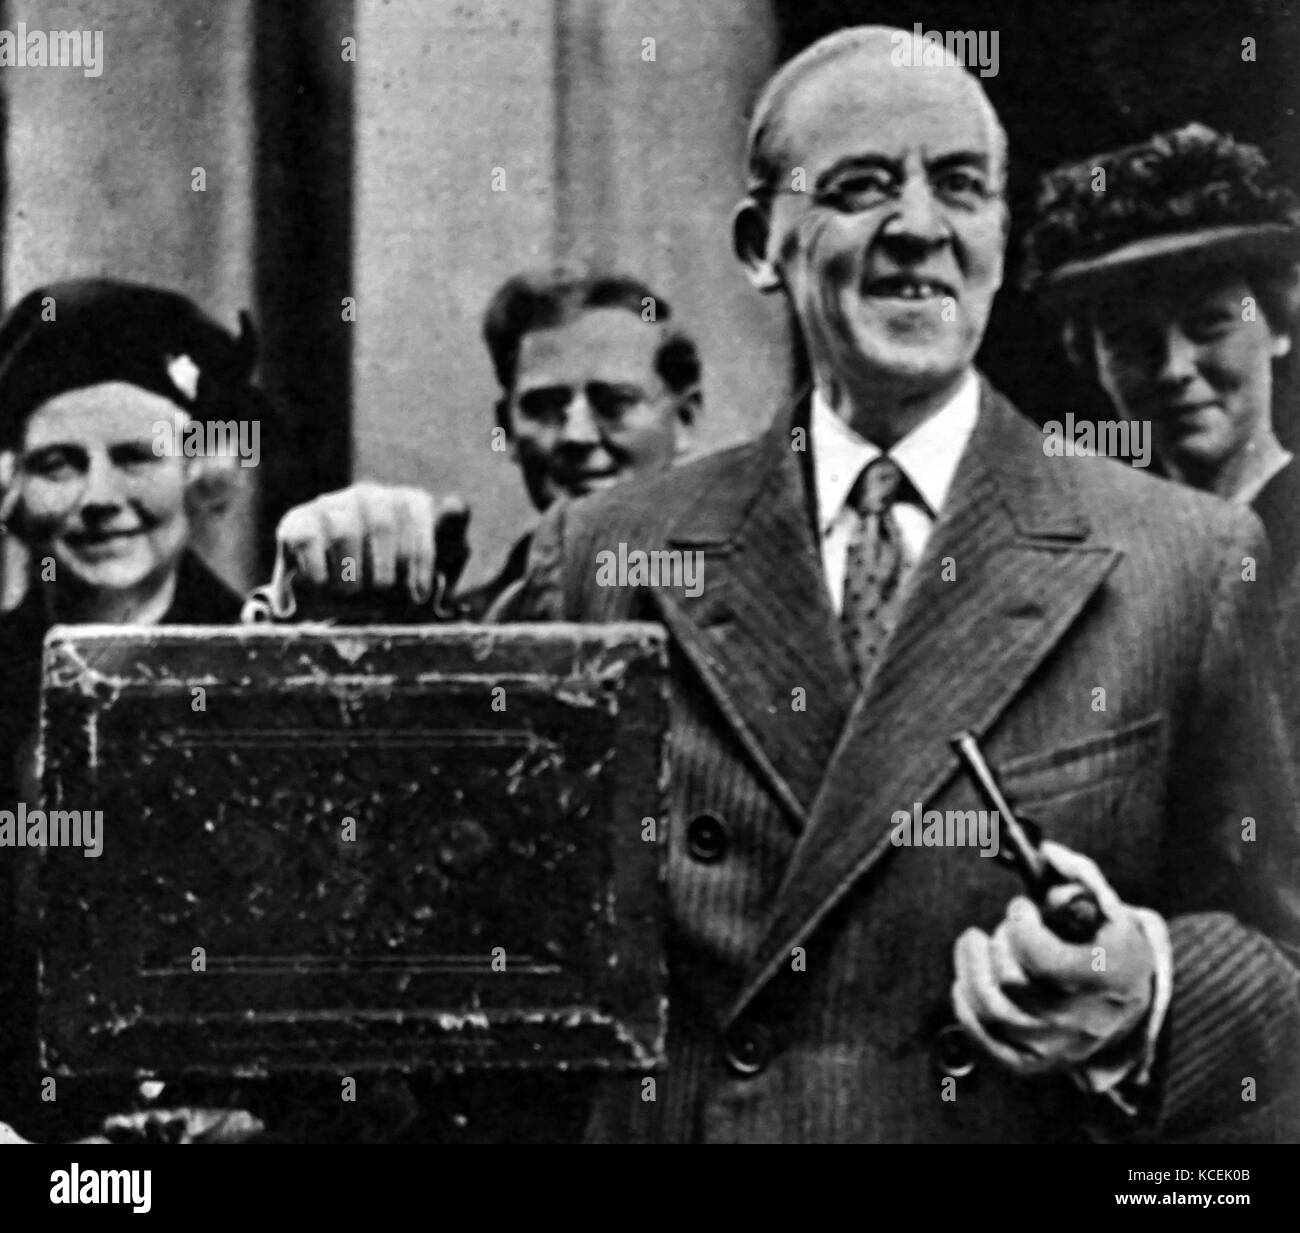 Photograph of Stafford Cripps (1889-1952) a British Labour politician and former Chancellor of the Exchequer. Dated 20th Century Stock Photo